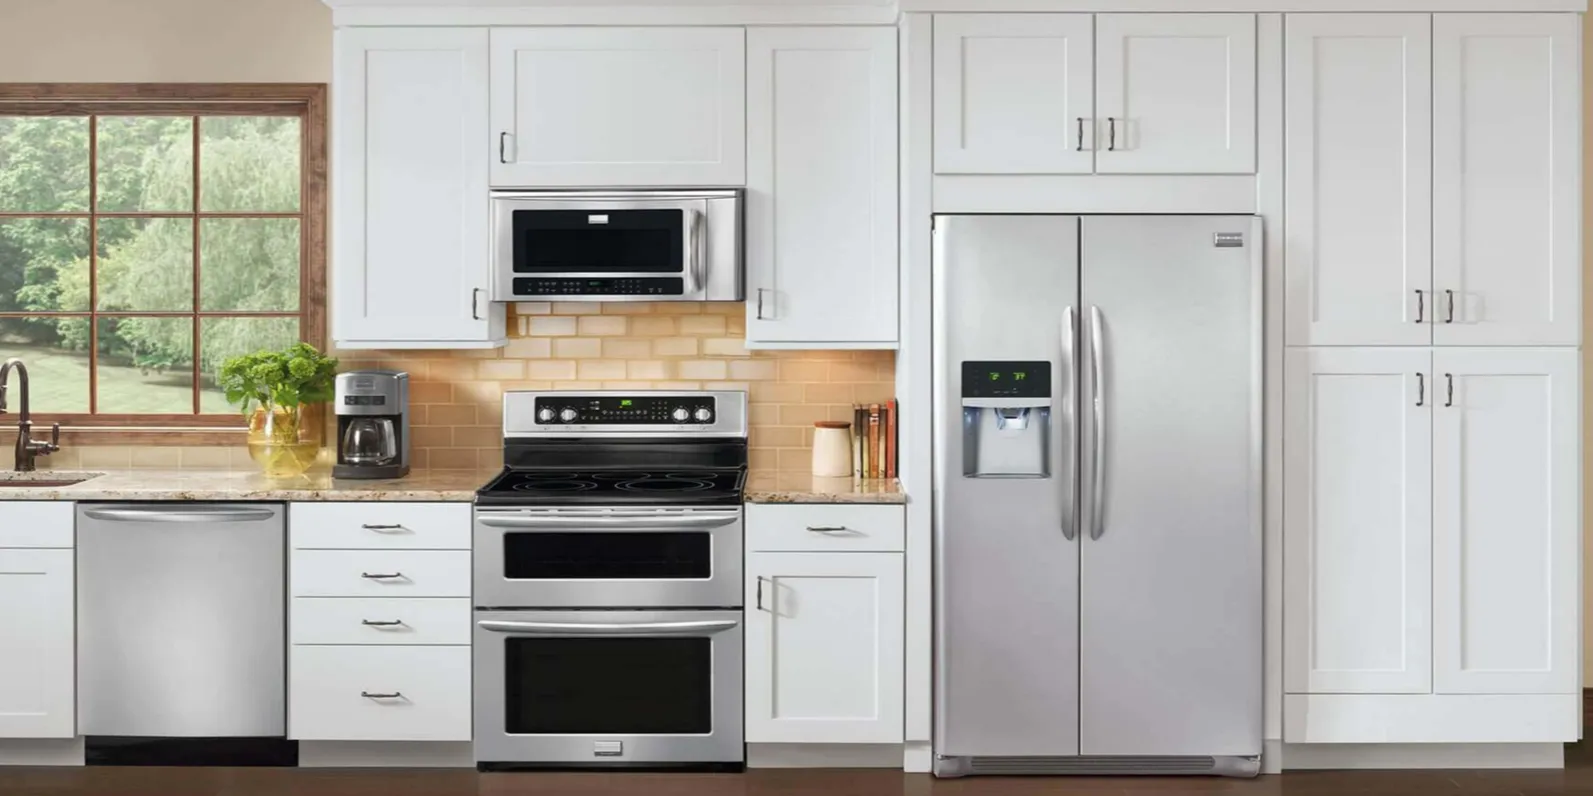 Advantages and Disadvantages of Side-by-Side Refrigerators